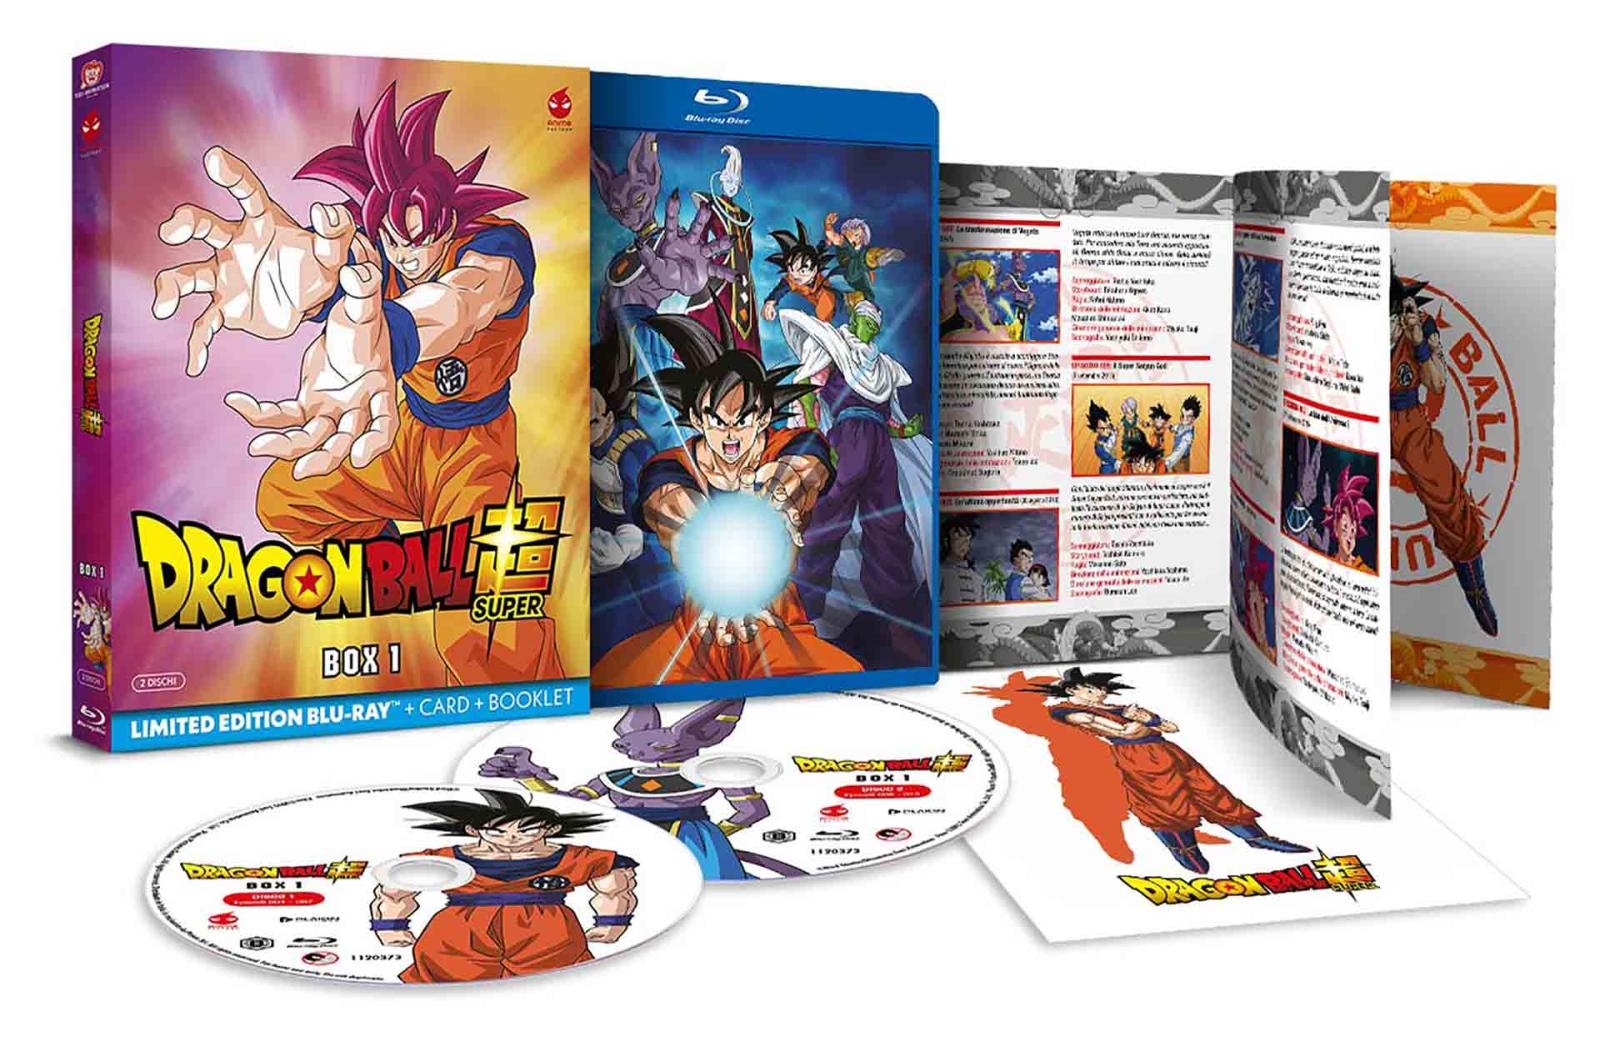 Dragon Ball Super - Volume 1 - Limited Edition 2 Blu-ray + Booklet + Cards (Blu-ray) Thumbnail 2